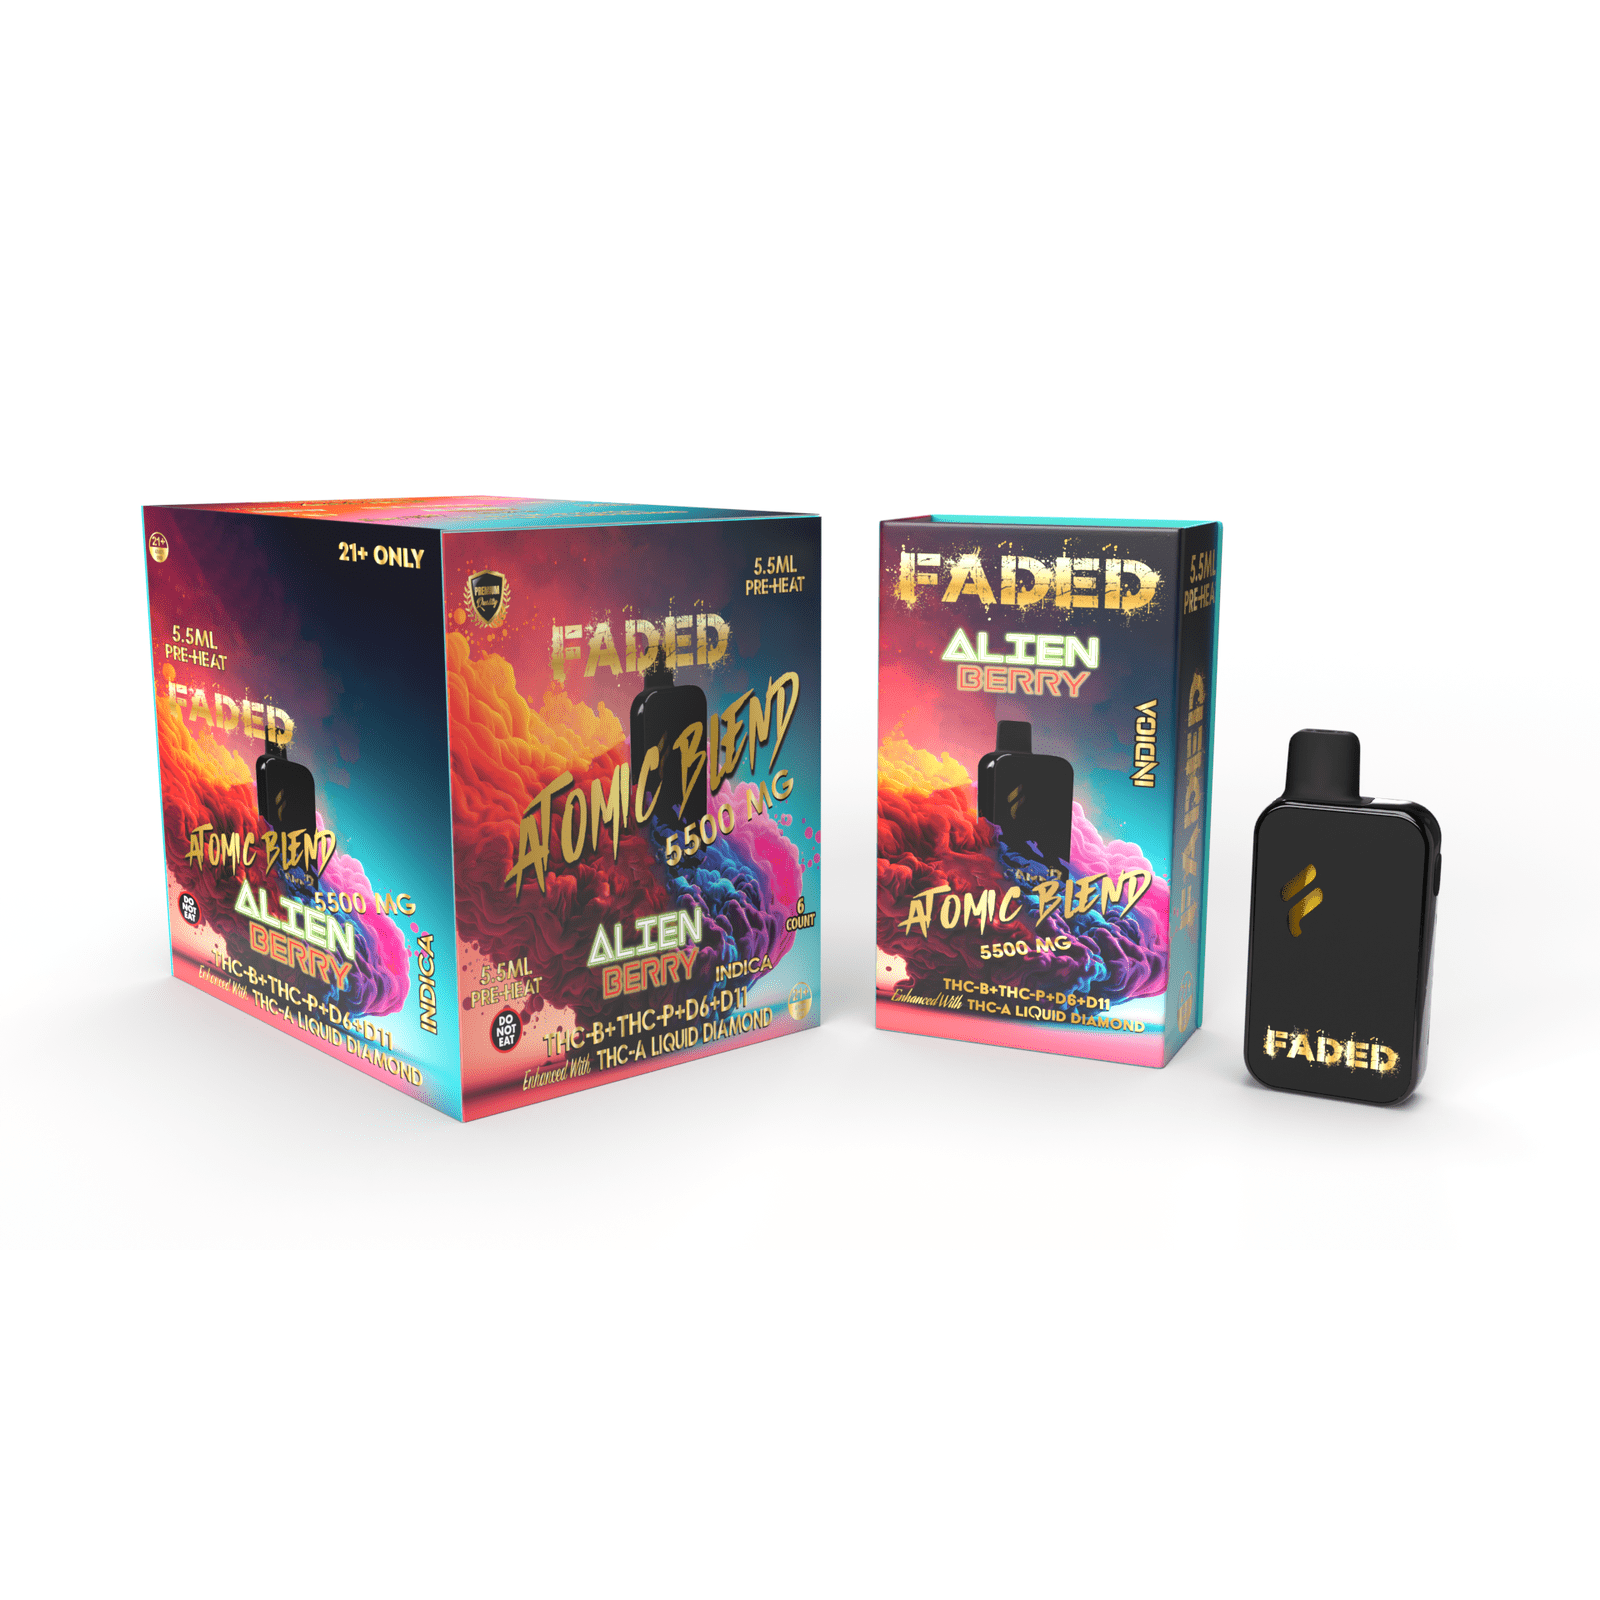 FADED THC-B+THC-P+D6+D11 ENHANCED WITH THC-A LIQUID DIAMOND RECHARGEABLE DISPOSABLE - INDICA ALIEN BERRY 5.5ML